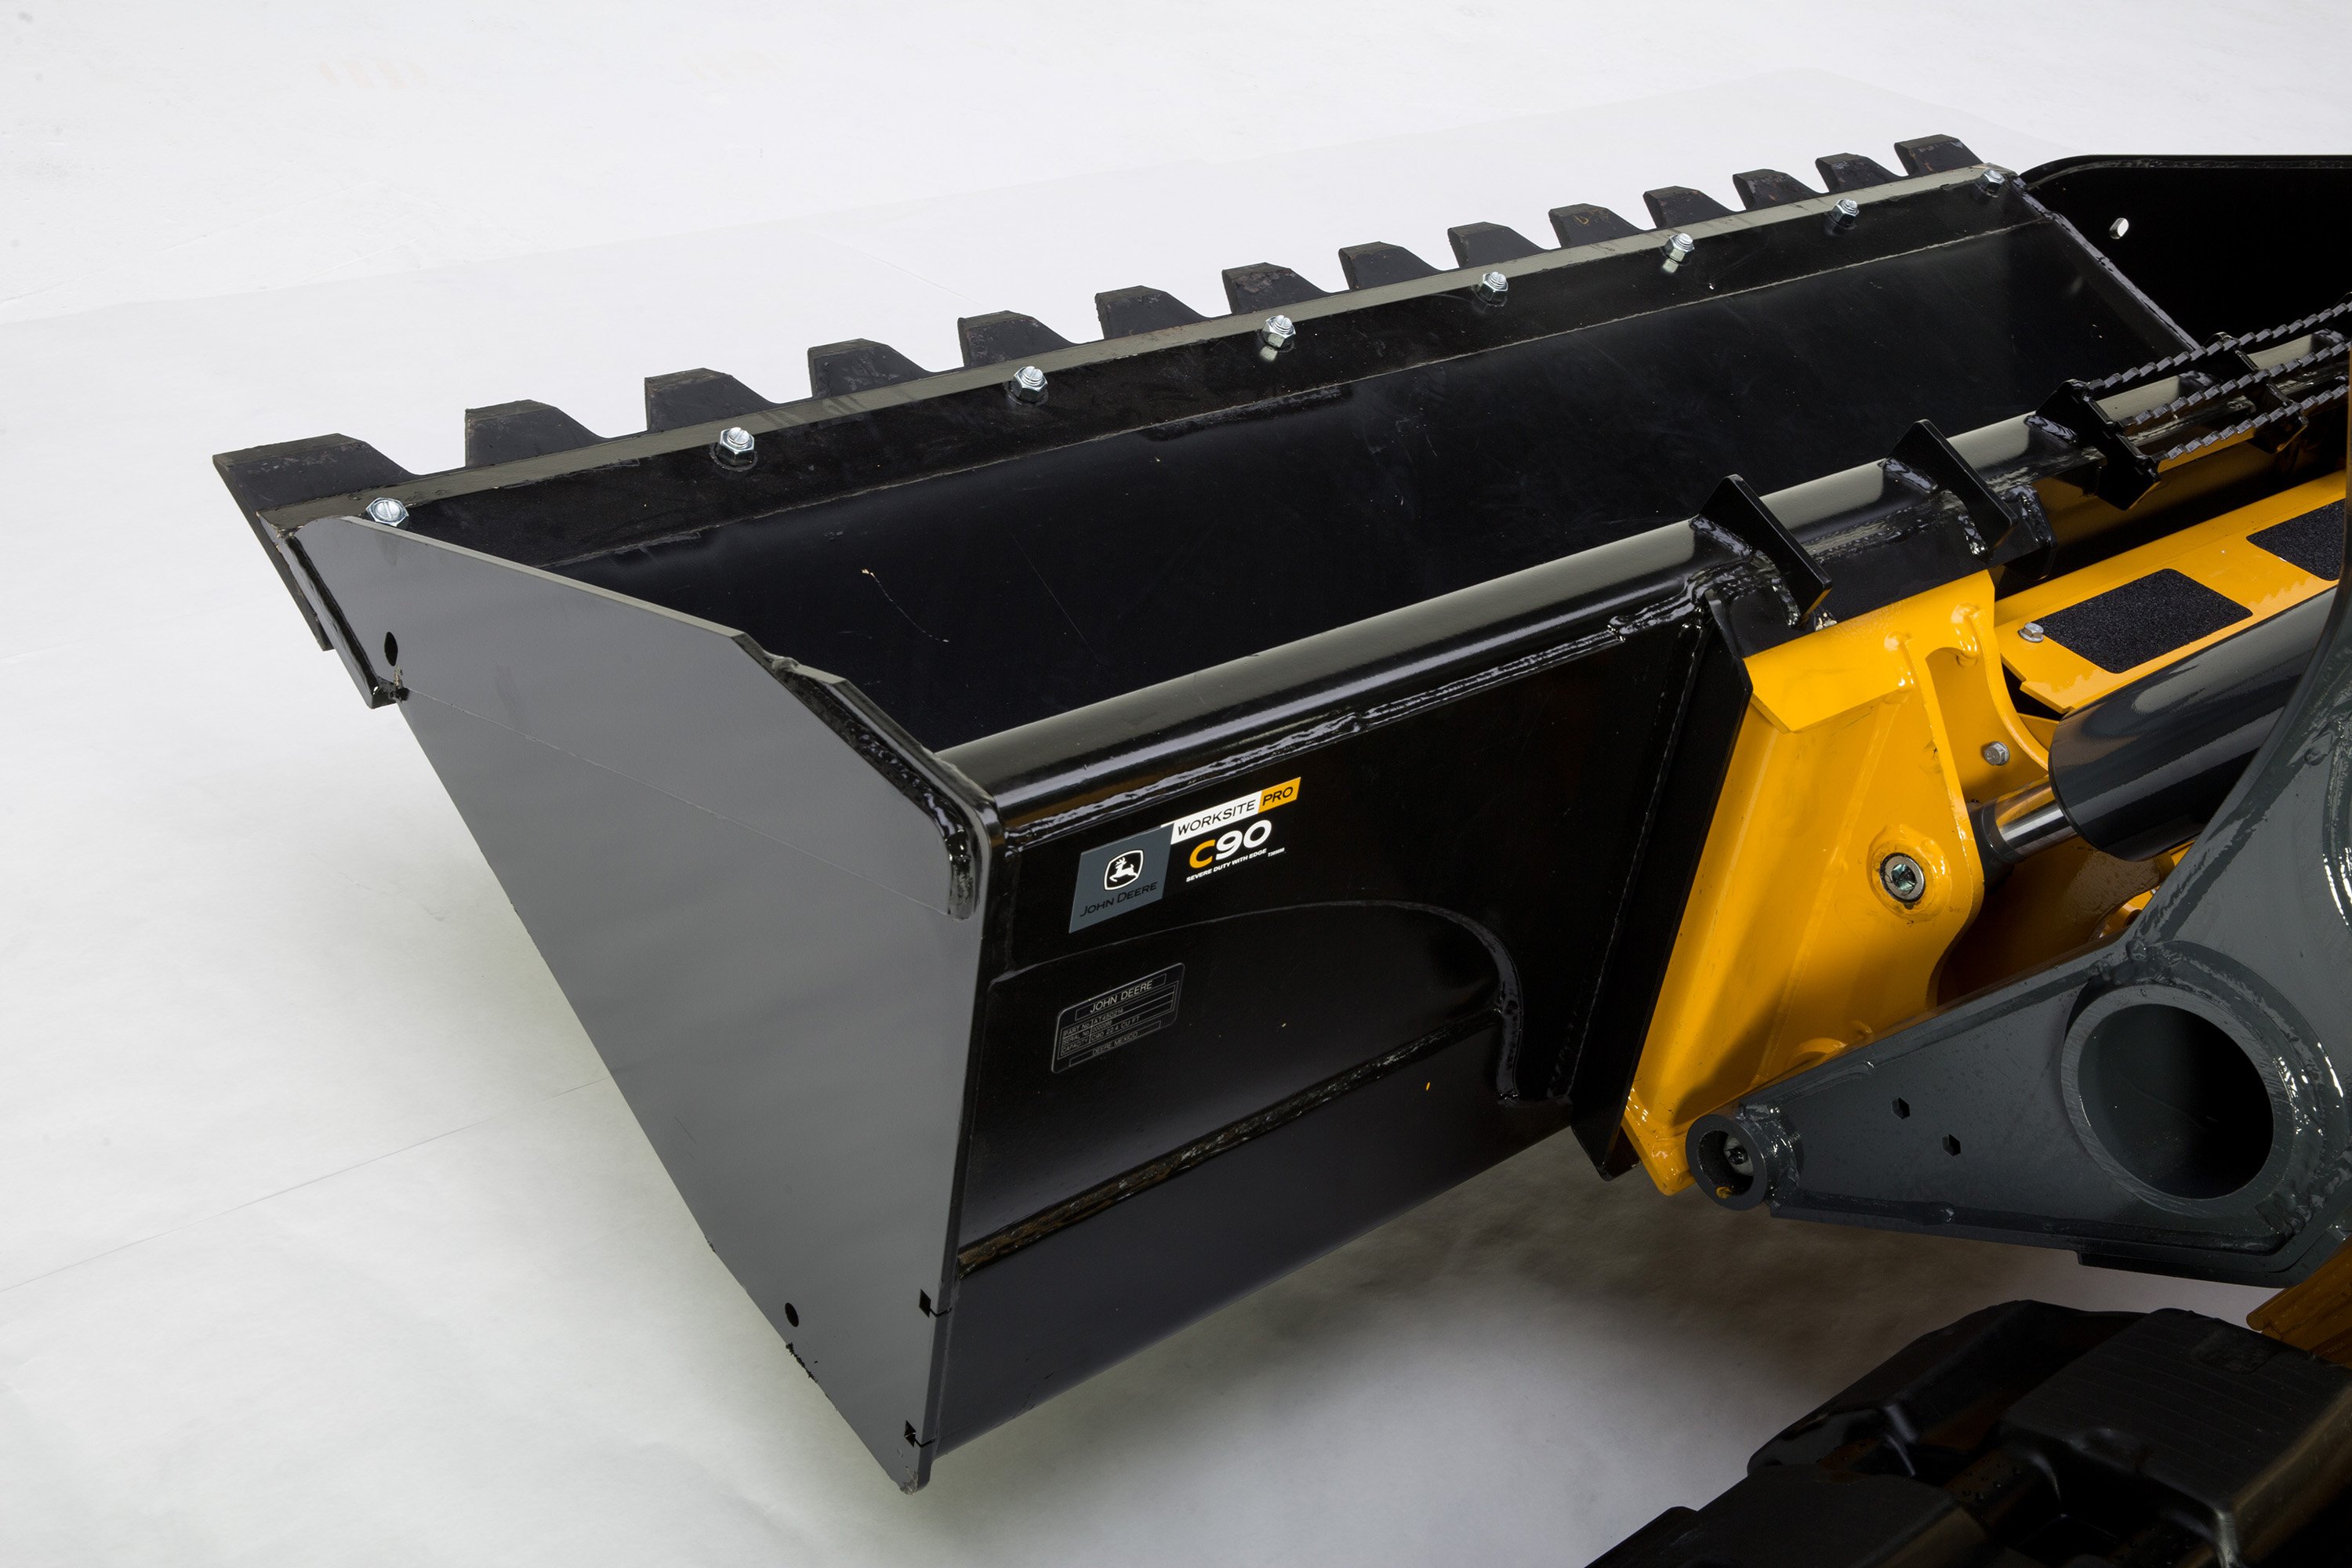 John Deere Collaborates With Agtek To Offer 90 Inch Severe Duty